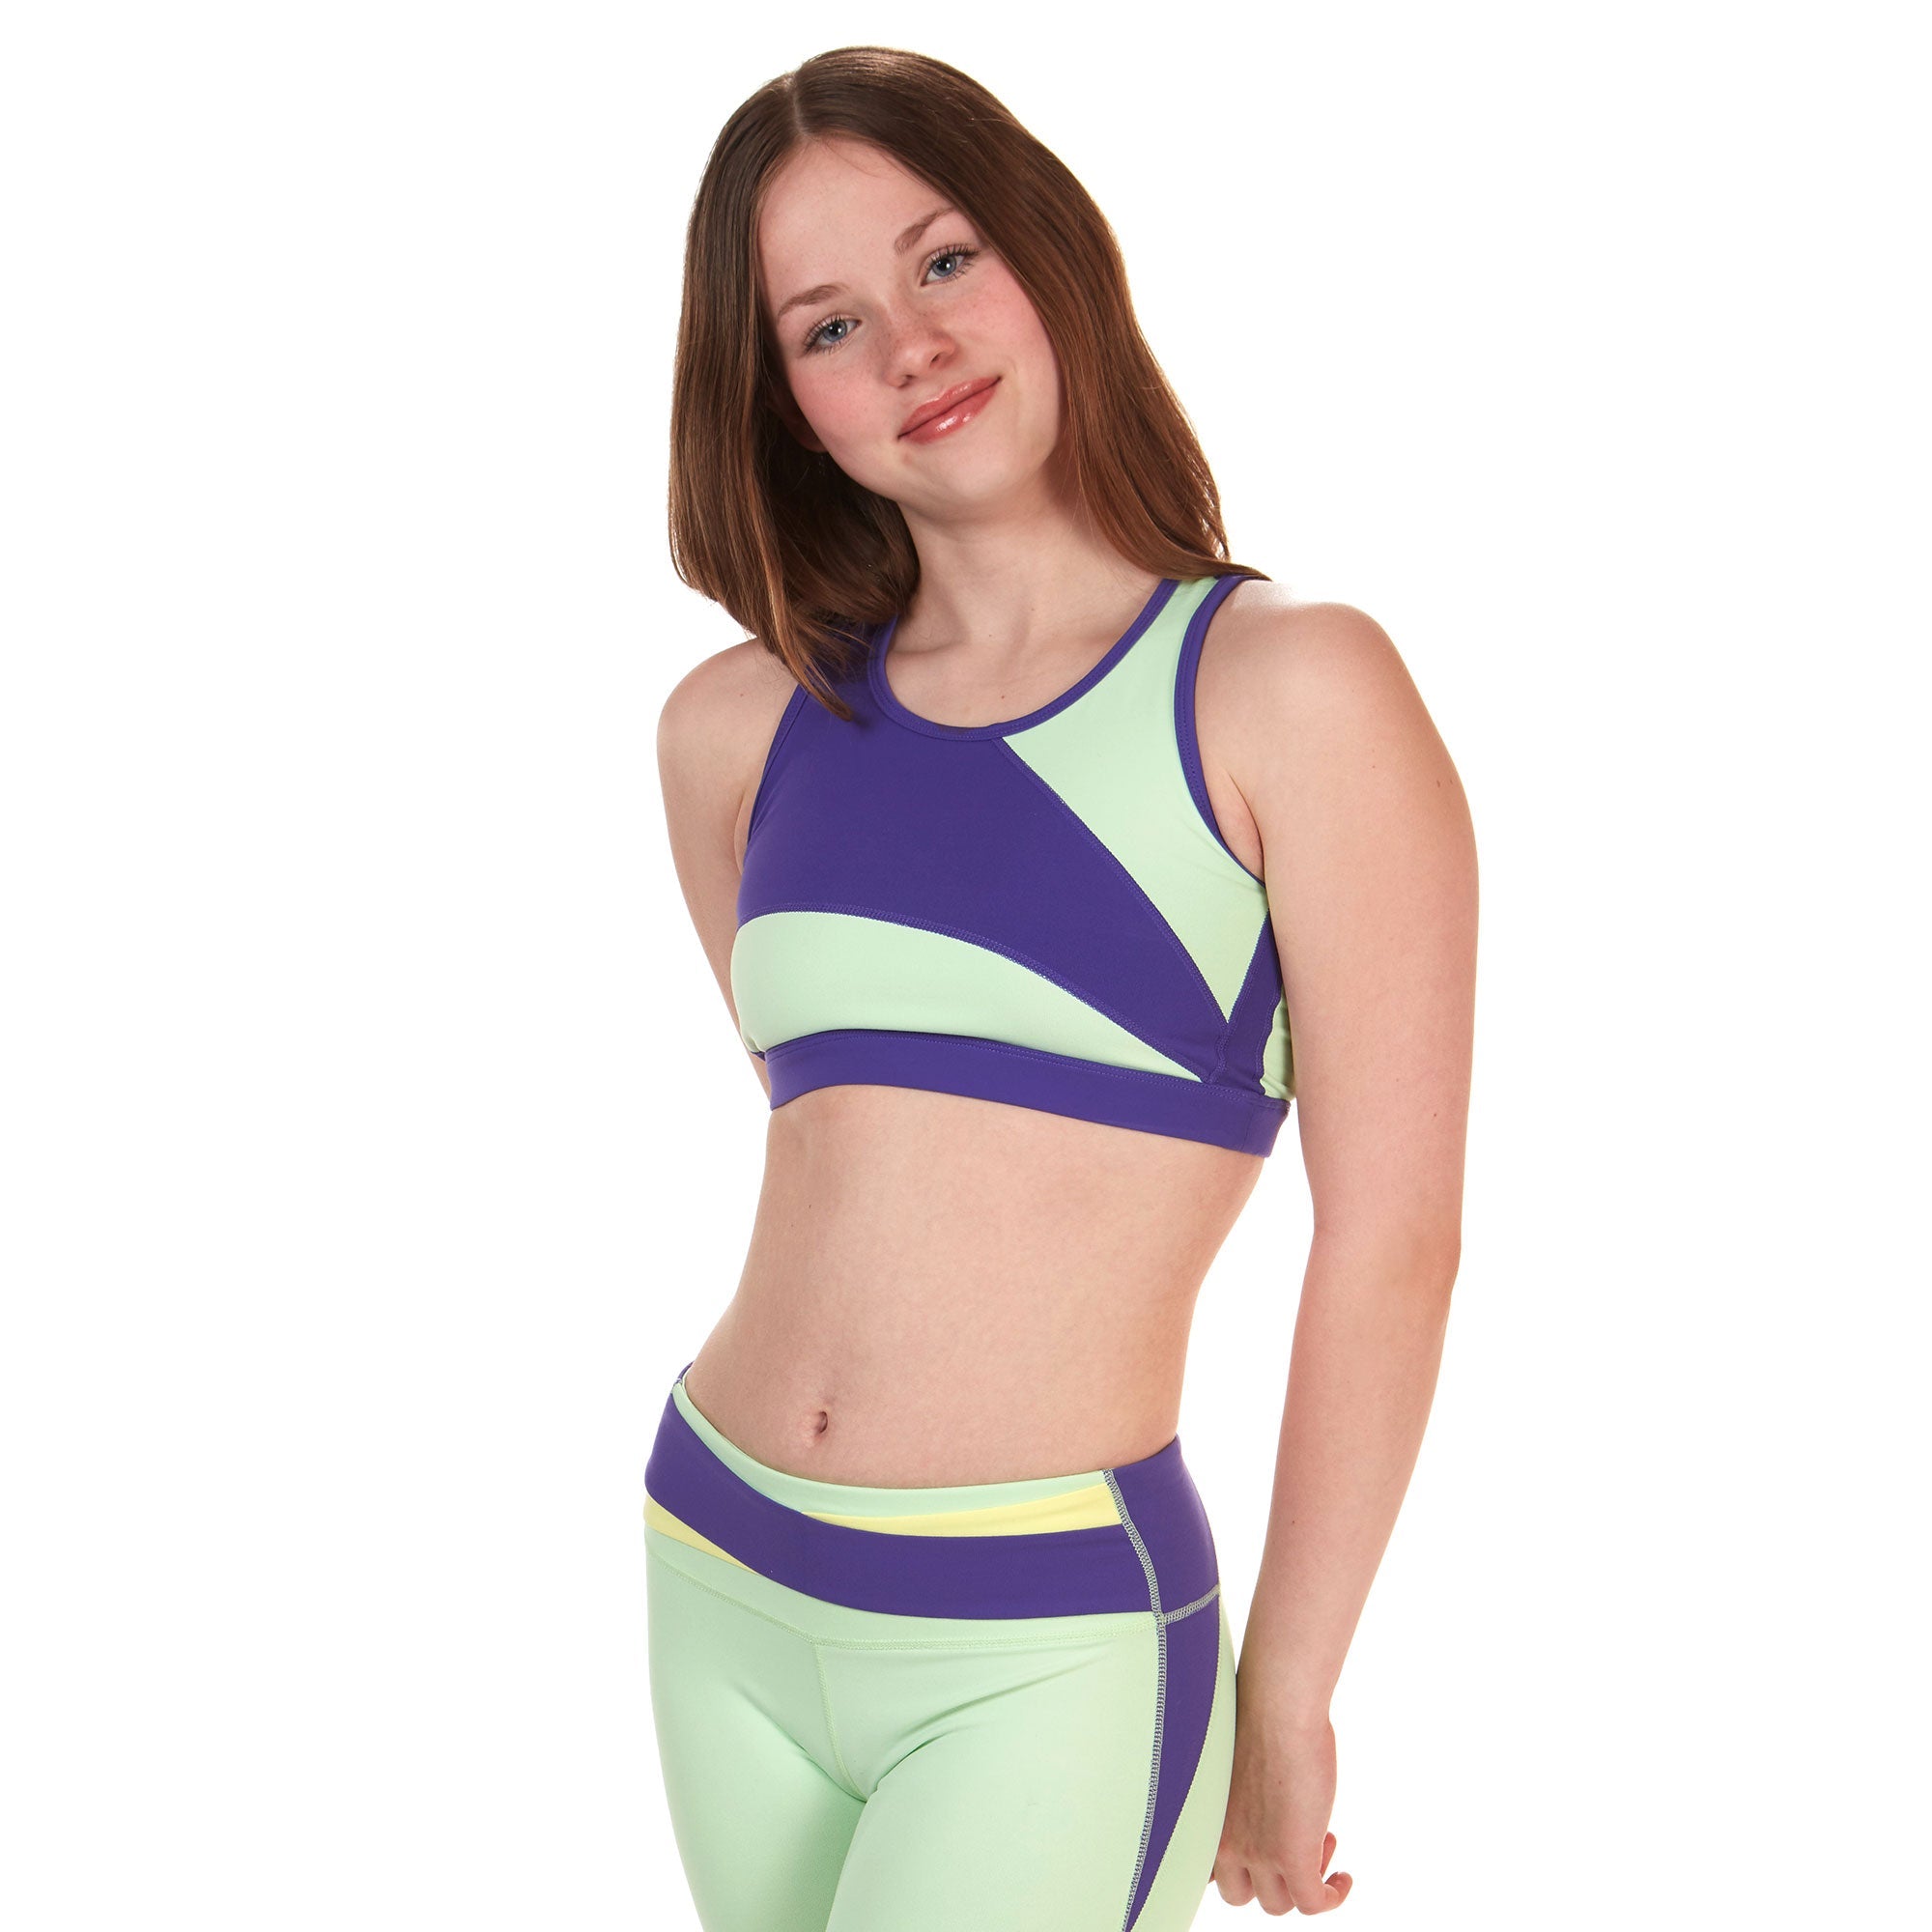 Outdoor Voices Sale: Shop Leggings, Sports Bras, and Shorts at 70